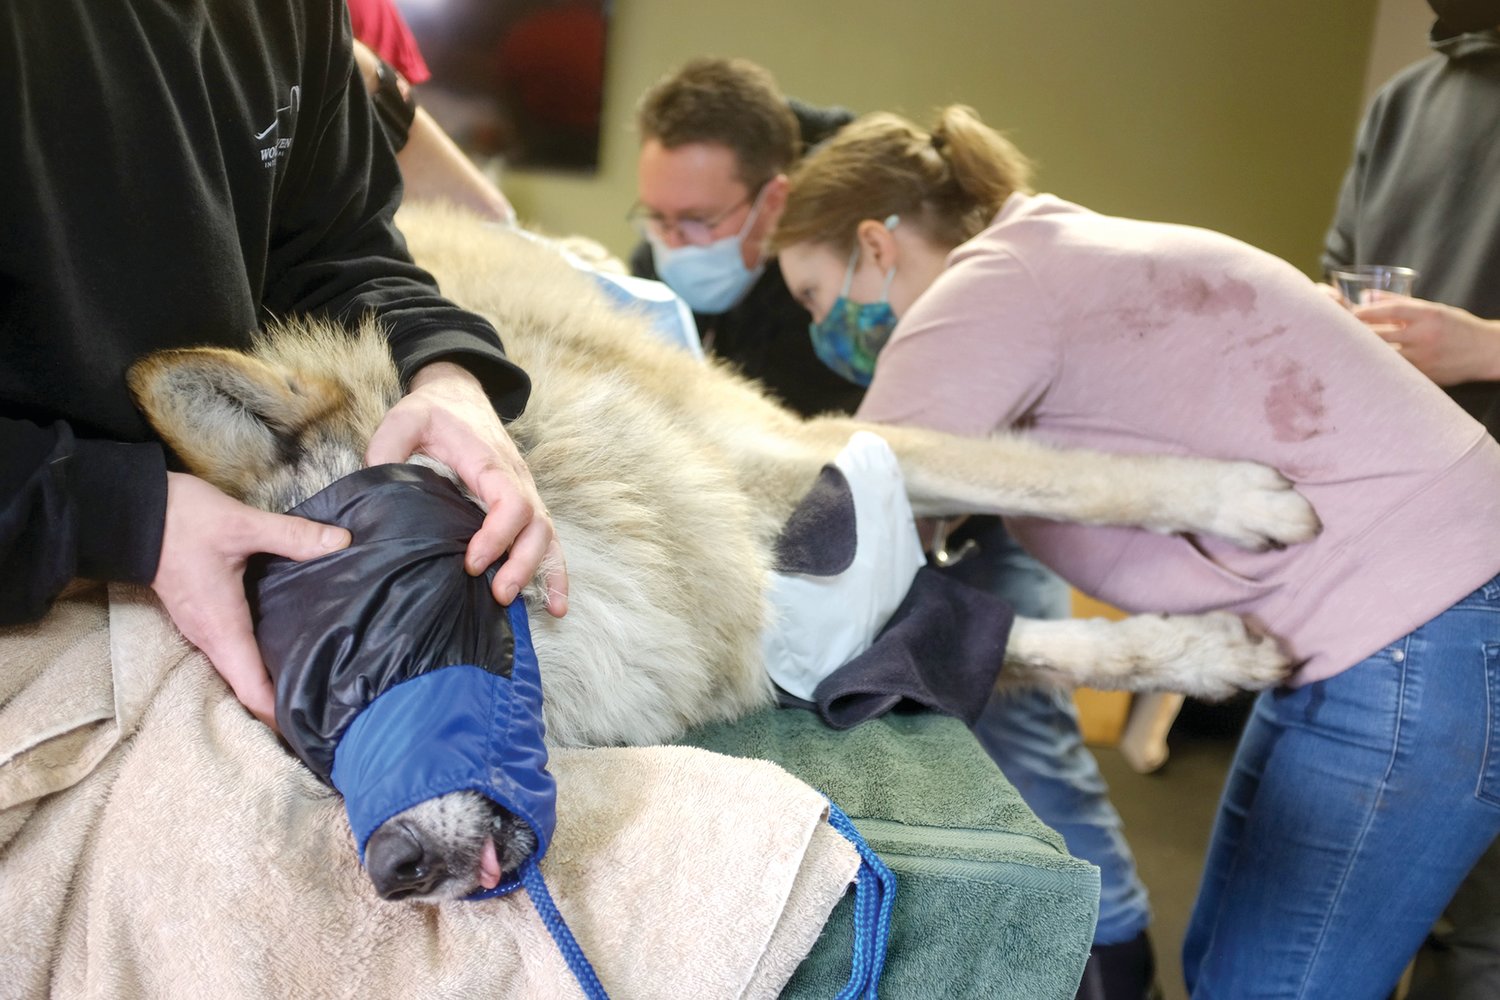 A wolf identified as M1630 is anesthetized for the semen collection process.